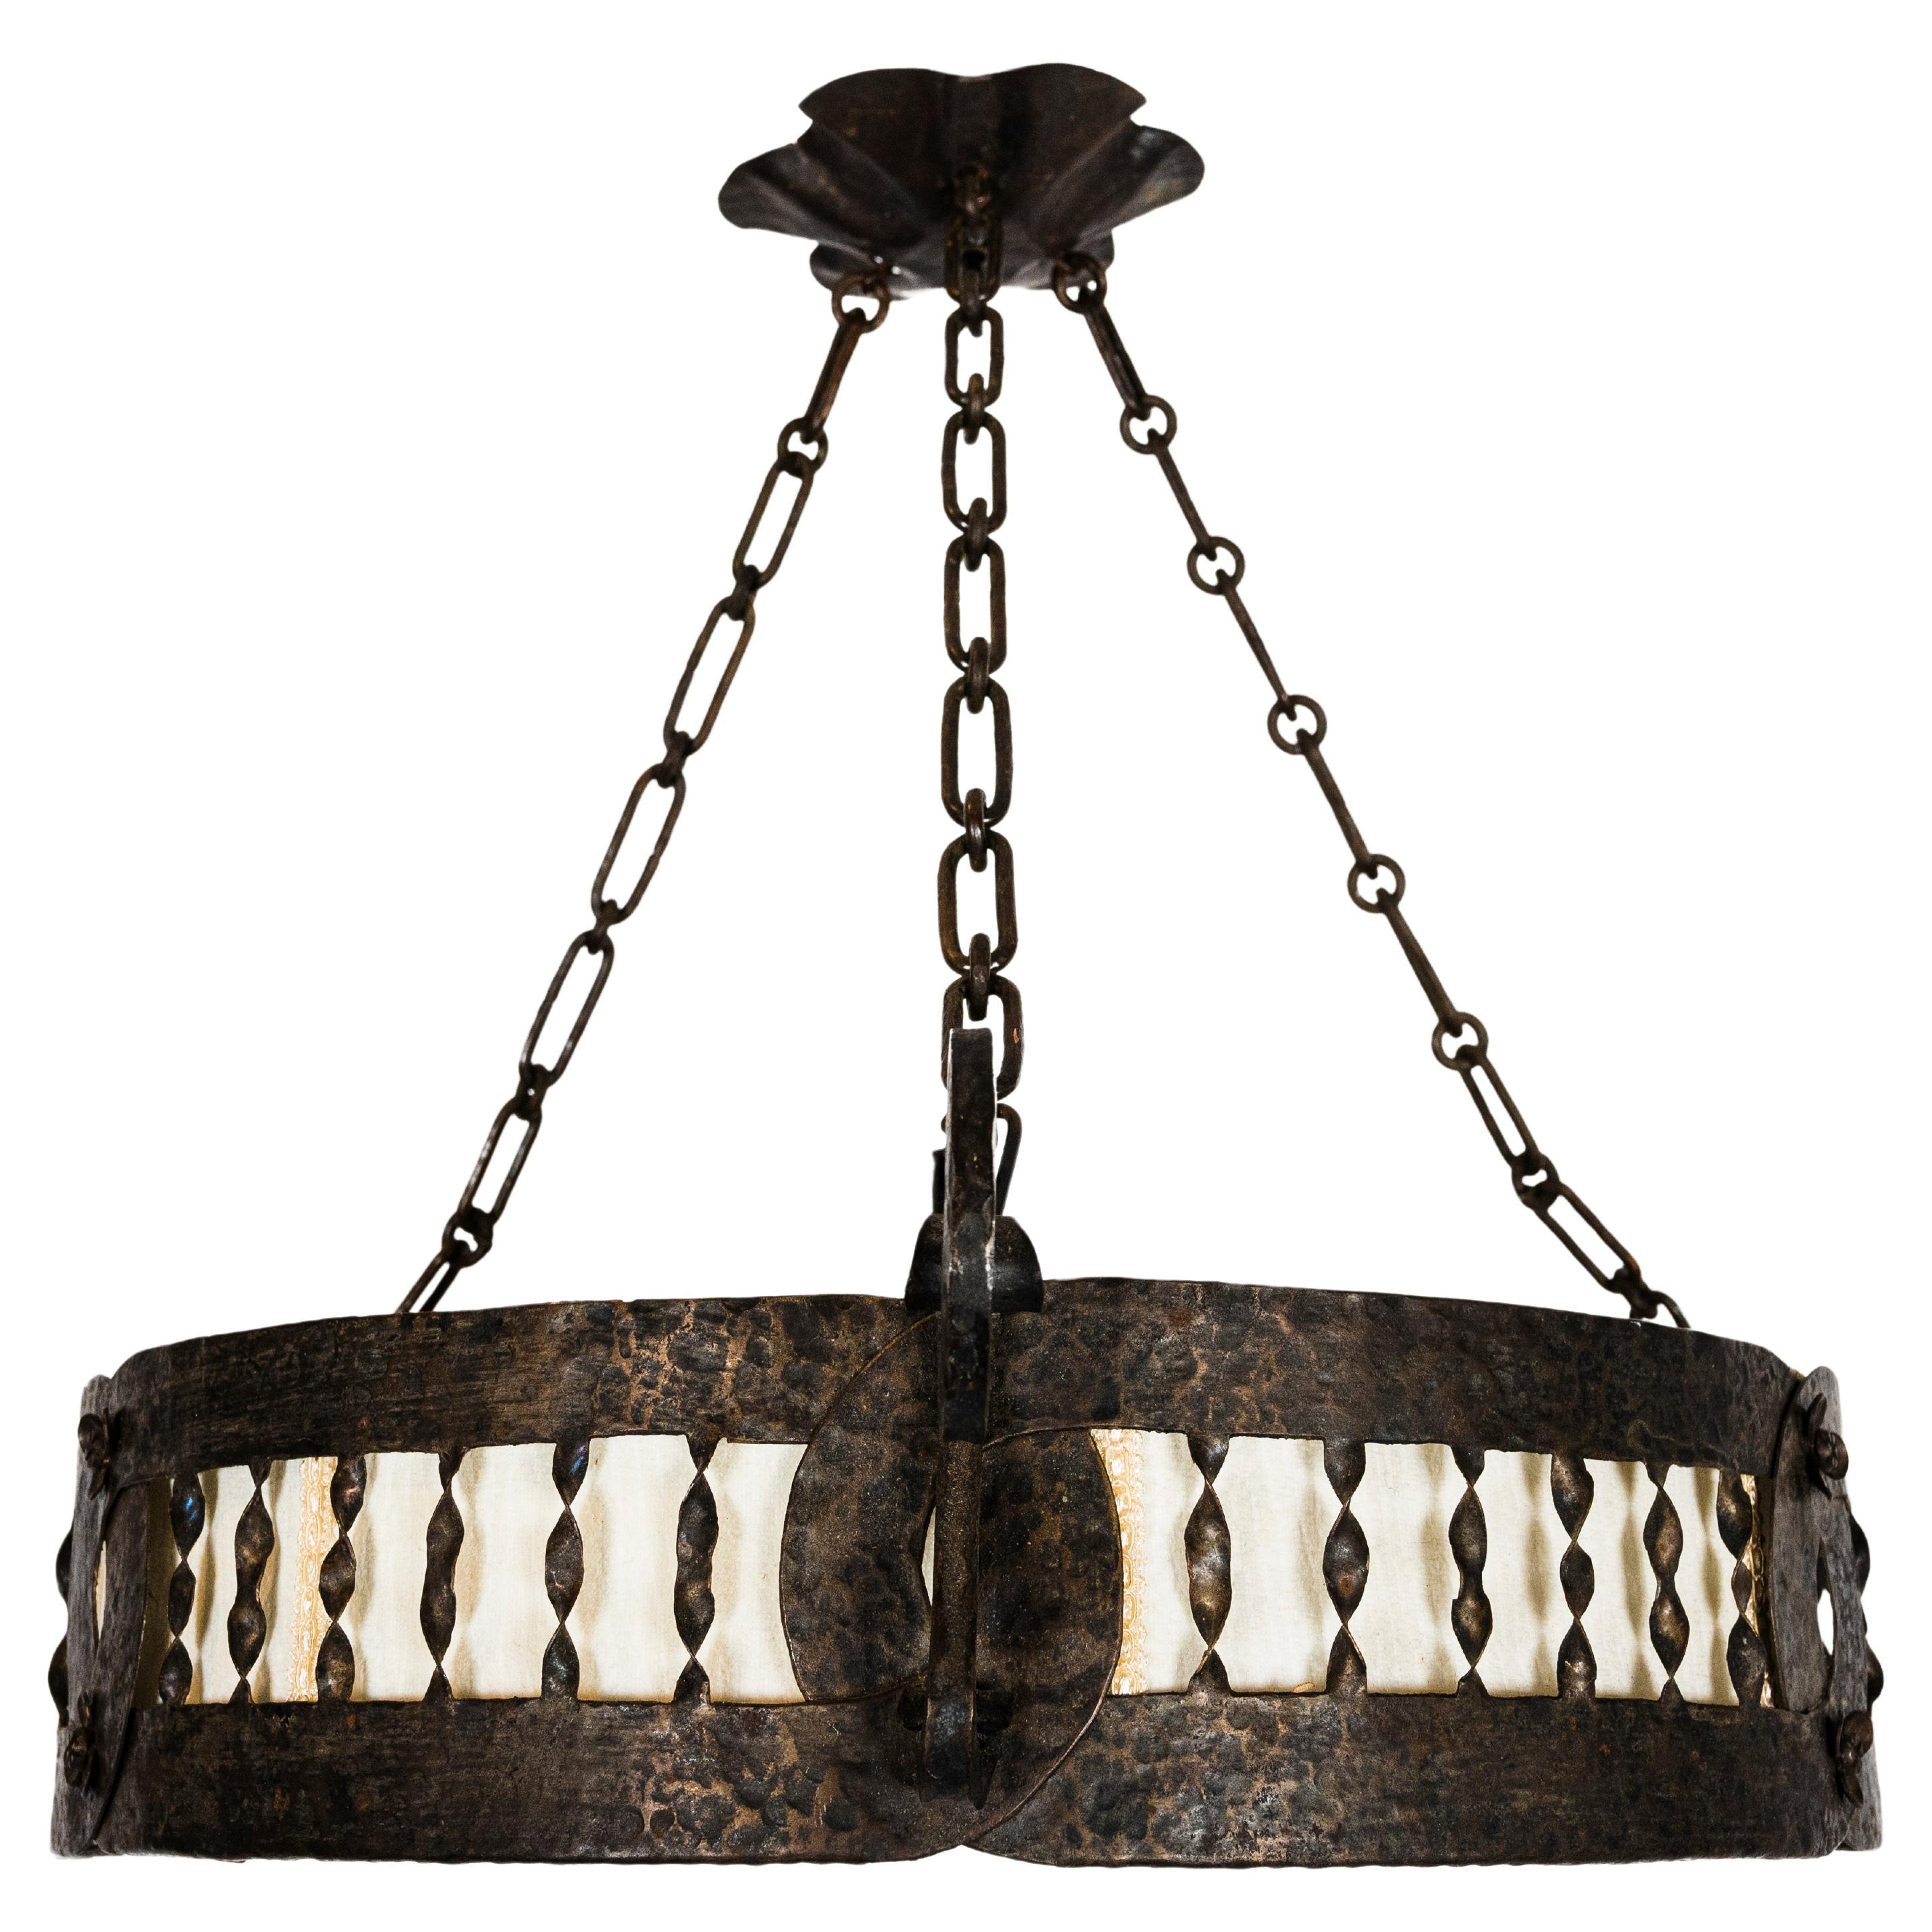 A Northern European Arts and Crafts pendant light. With a hammered and patinated brass frame, and a fabric covered insert. Contains three medium sockets. Circa 1910
